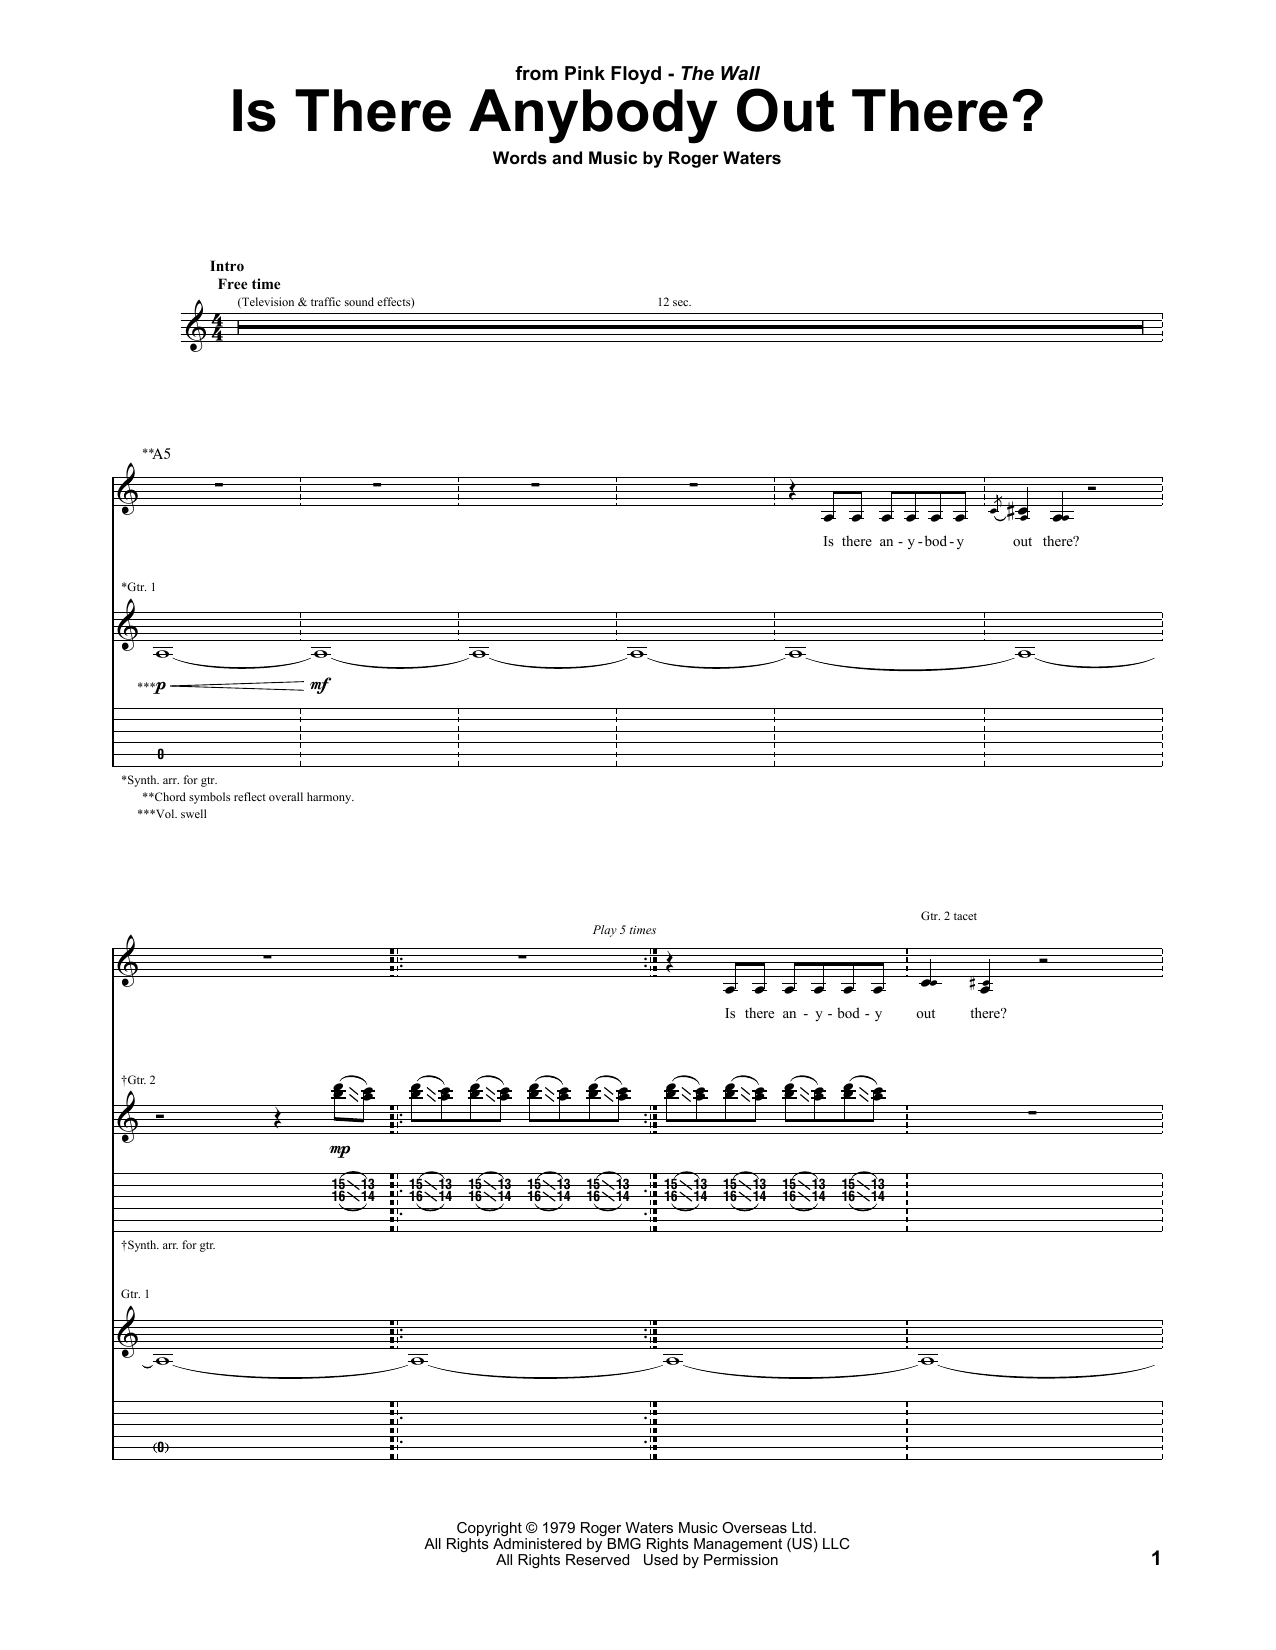 Download Pink Floyd Is There Anybody Out There? Sheet Music